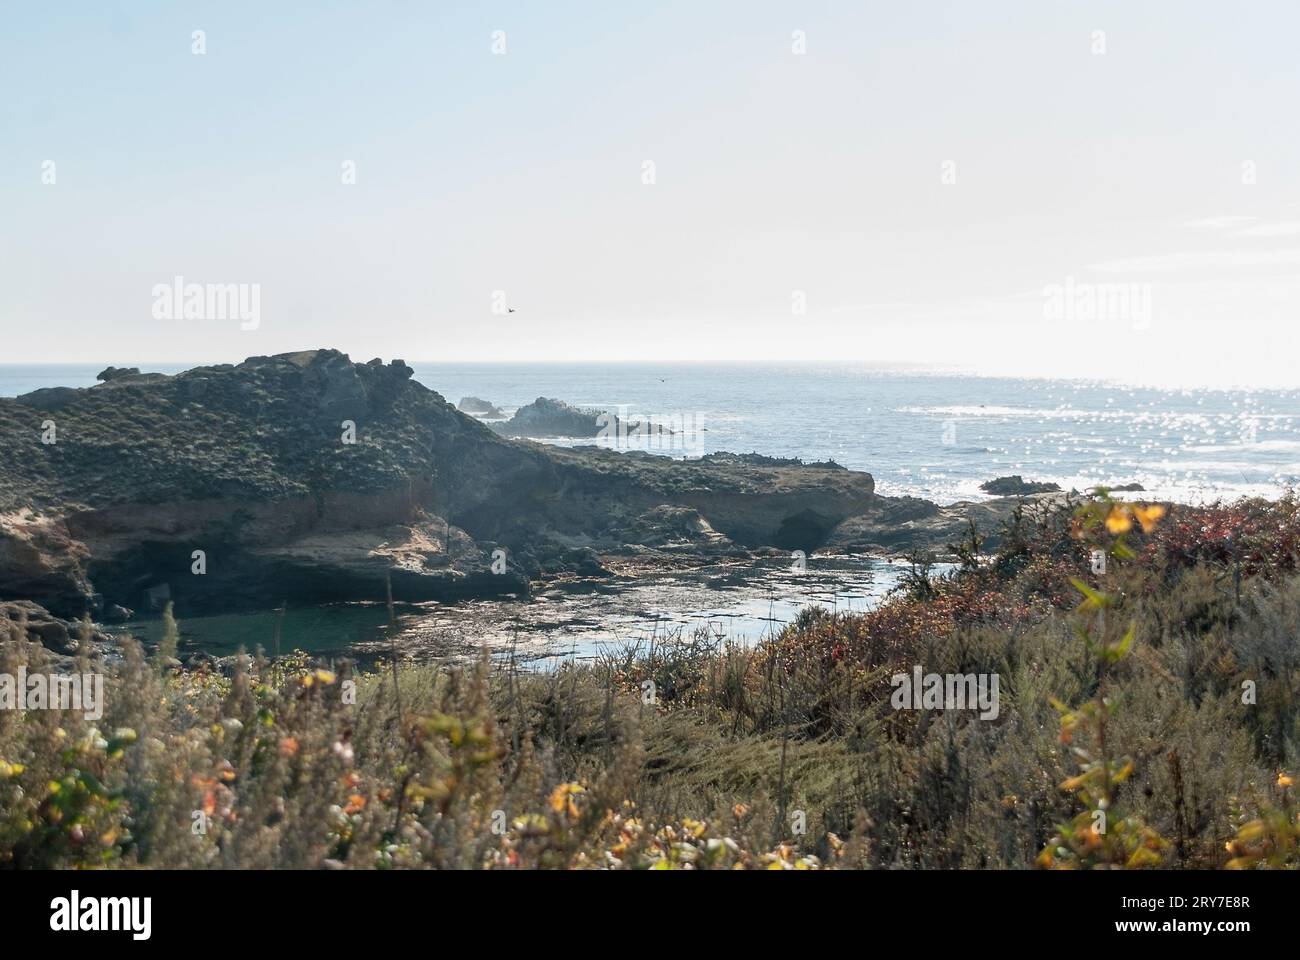 A meadow of shrubs in bloom along the rocky coast of California in the summer Stock Photo